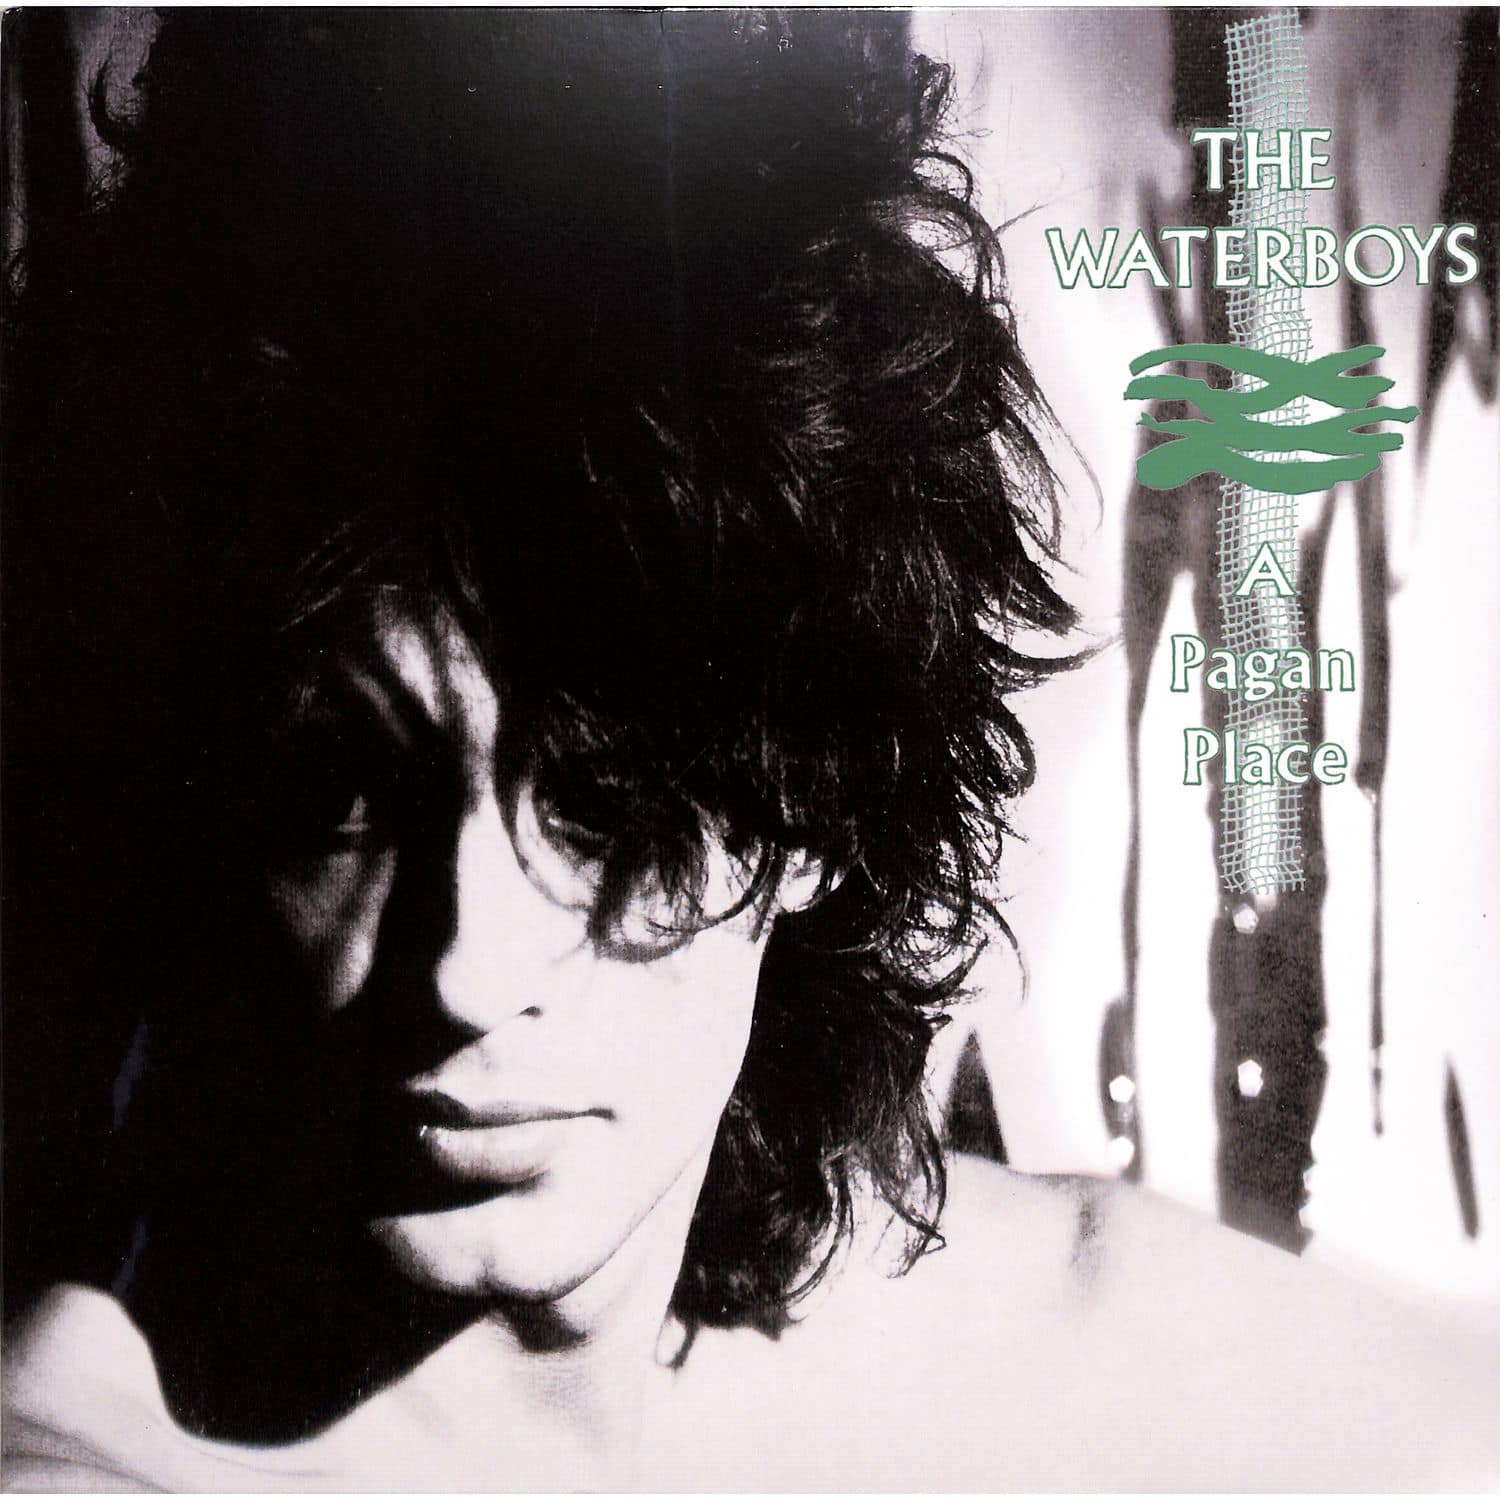 The Waterboys - A PAGAN PLACE 